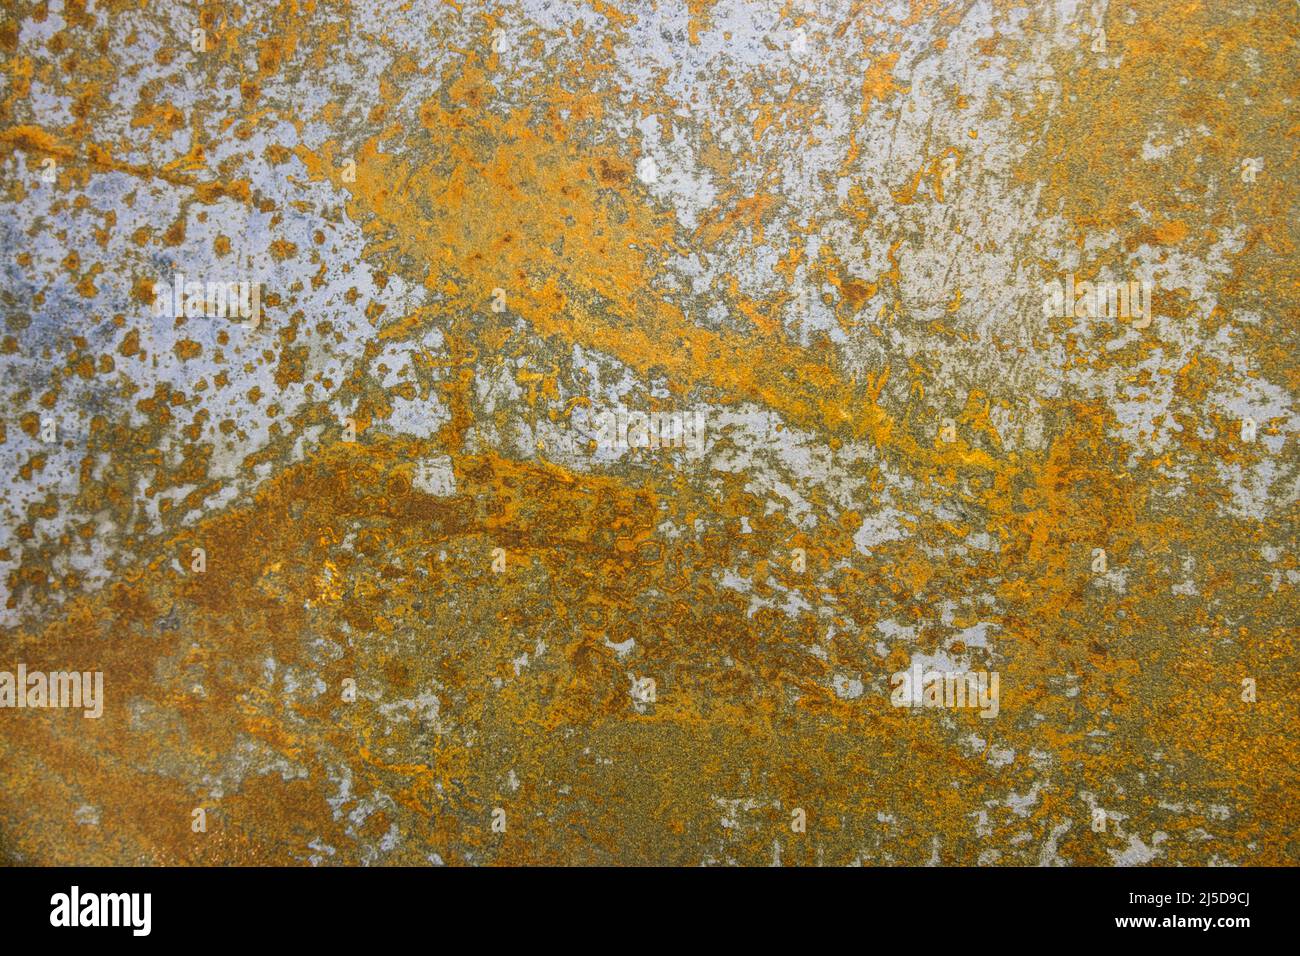 Rusty metal with corrosion and deep crack on the texture of the surface Stock Photo